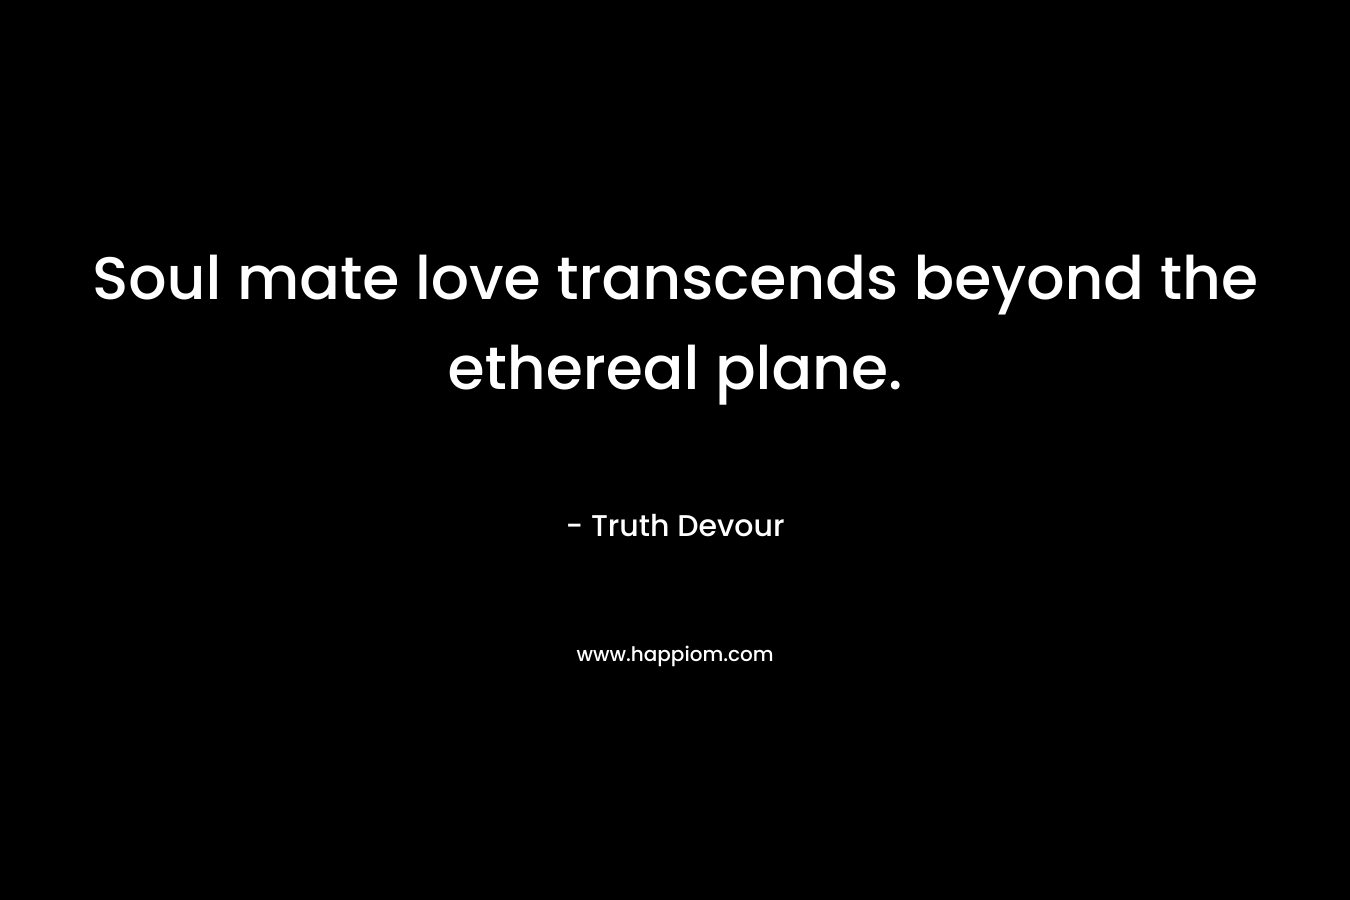 Soul mate love transcends beyond the ethereal plane.